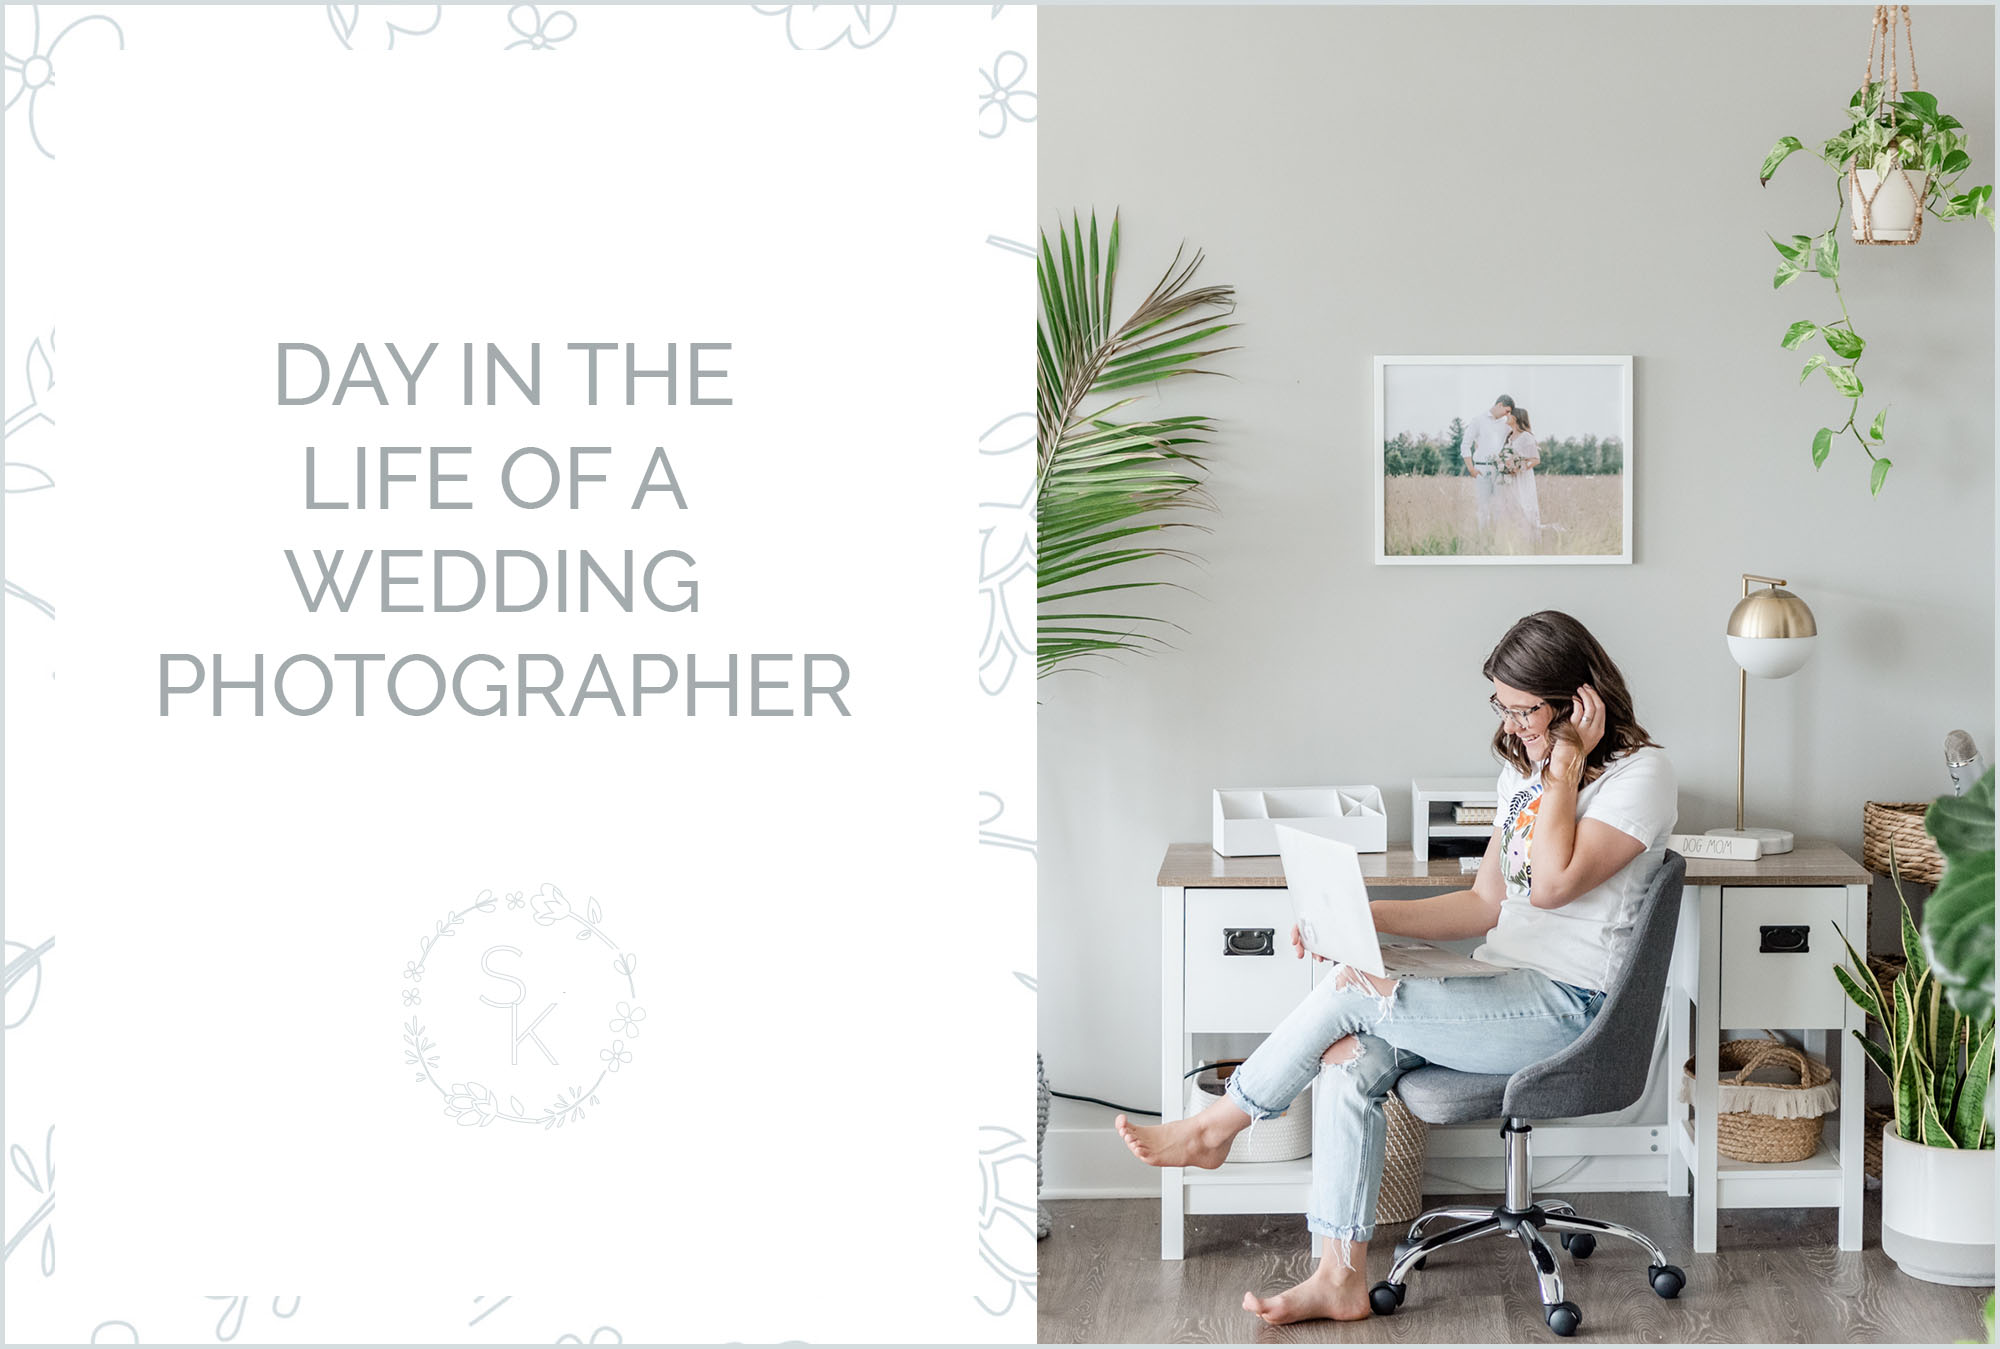 Stephanie Kase Photography shares a day in the life of a wedding photographer